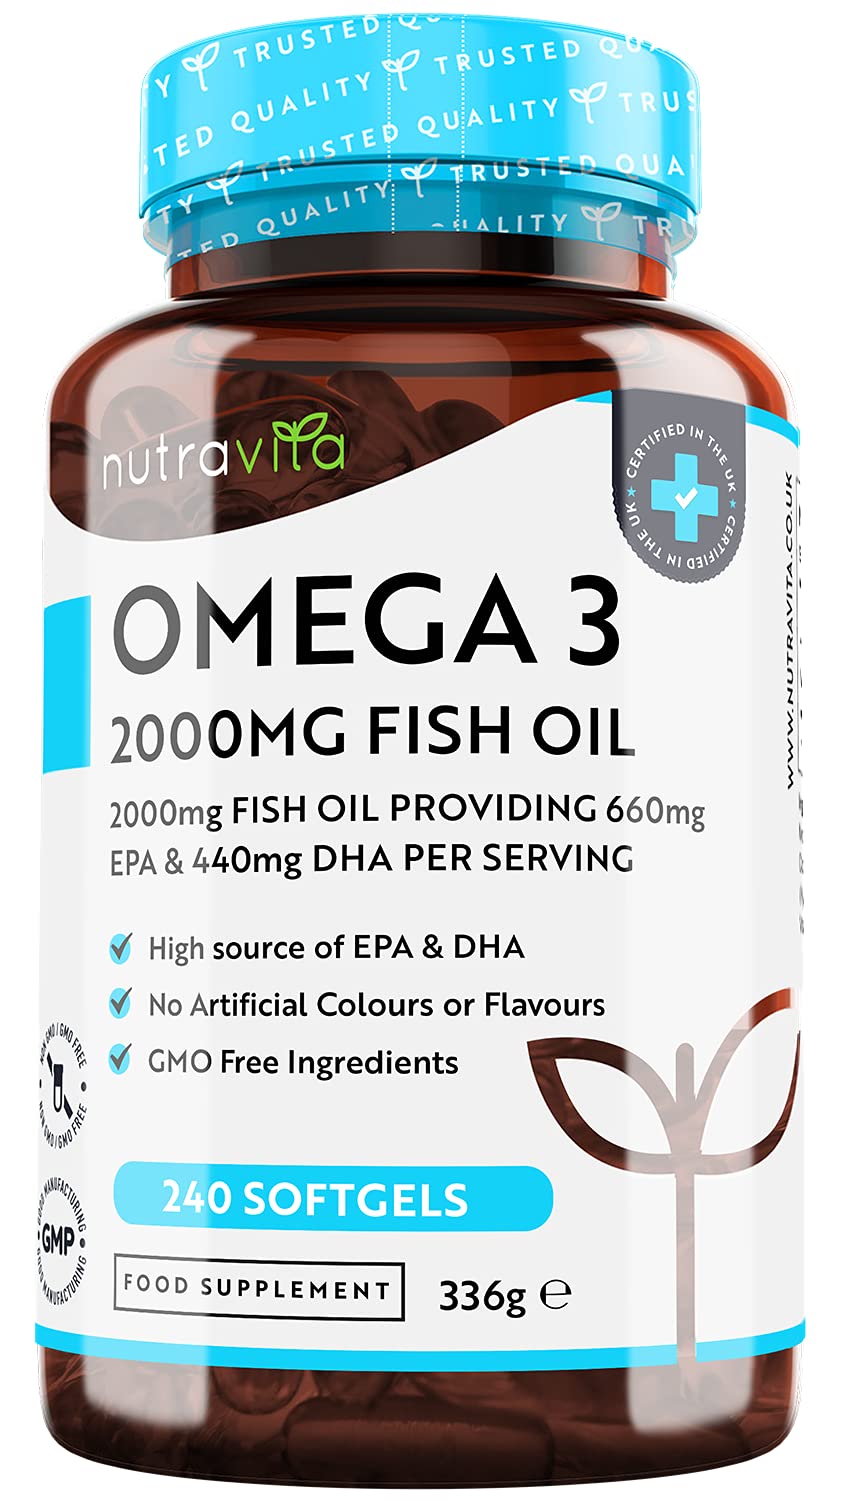 [Australia] - Omega 3 Fish Oil 2000mg – 240 High Strength Capsules (4 Month Supply) – 660mg EPA & 440mg DHA per Daily Serving – Supports Normal Heart Function – Pure Omega 3 Capsules – Made in The UK by Nutravita 